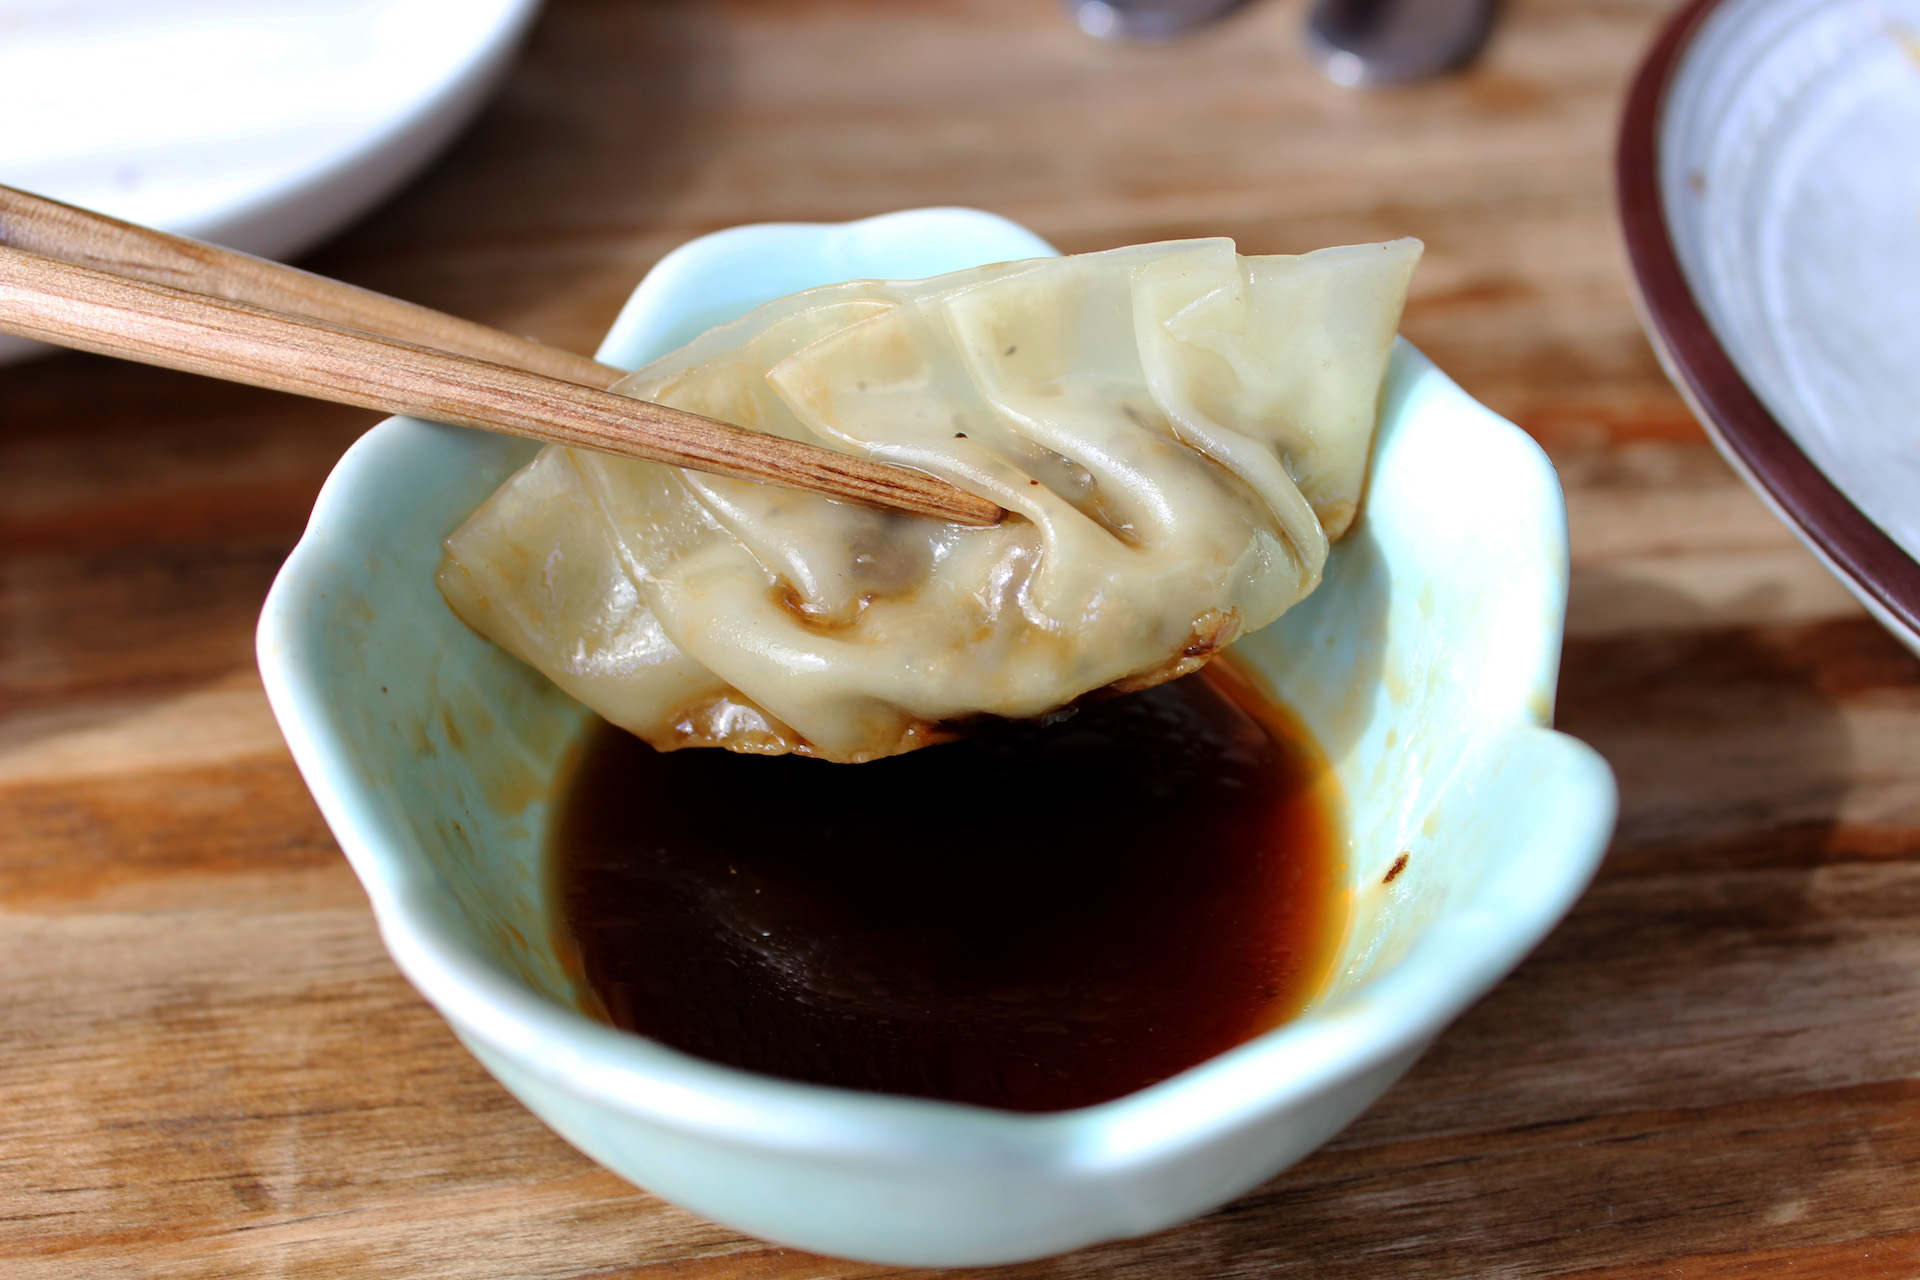 Bon, Nene's original potstickers are filled with pork, sprouts, cabbage, ginger and garlic.